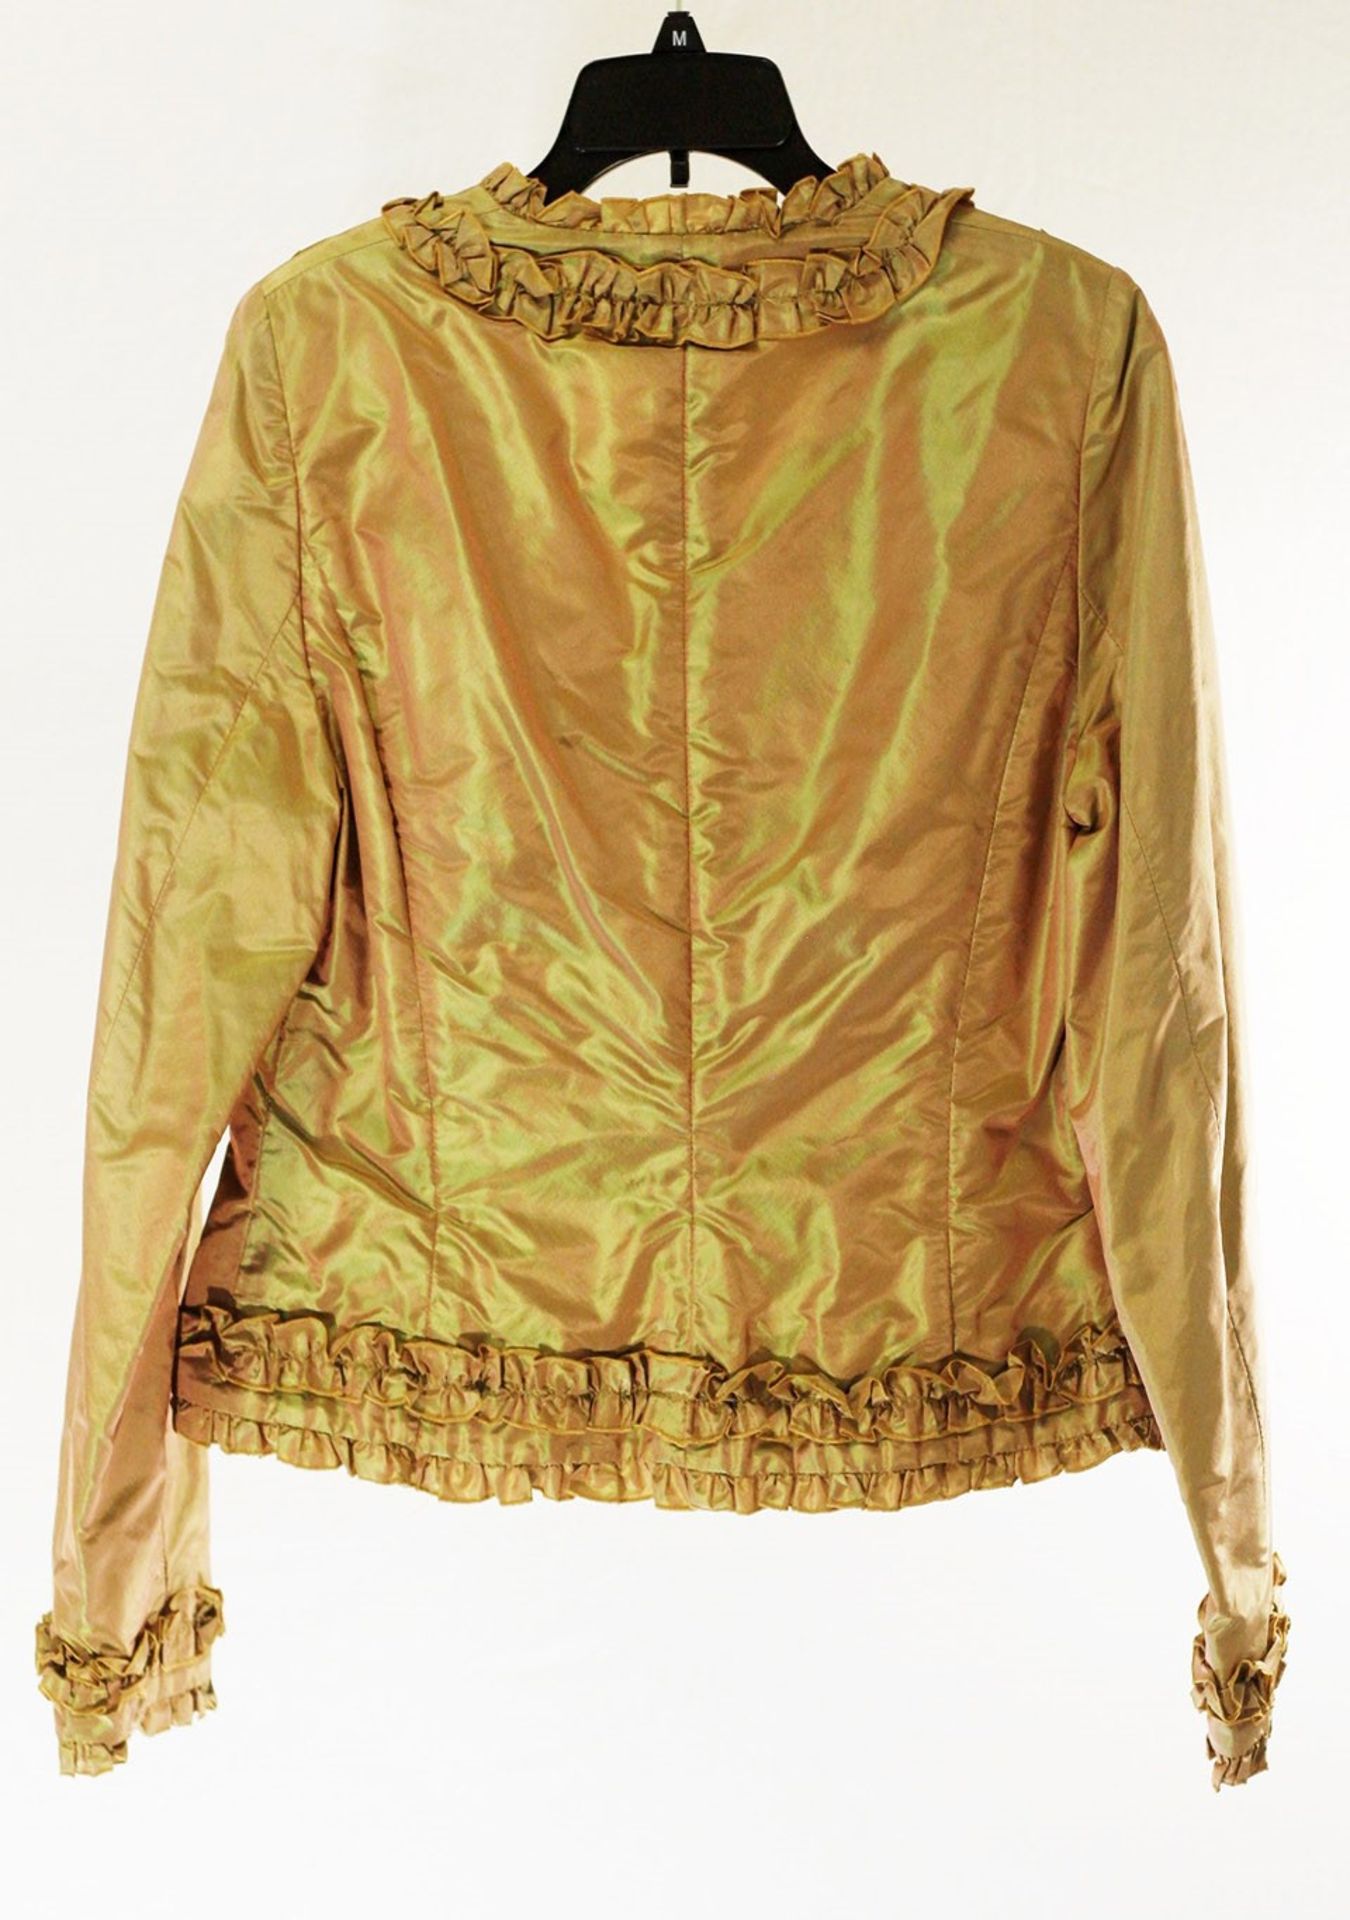 1 x Anne Belin Gold Green Jacket - Size: 18 - Material: 100% Silk - From a High End Clothing - Image 2 of 10